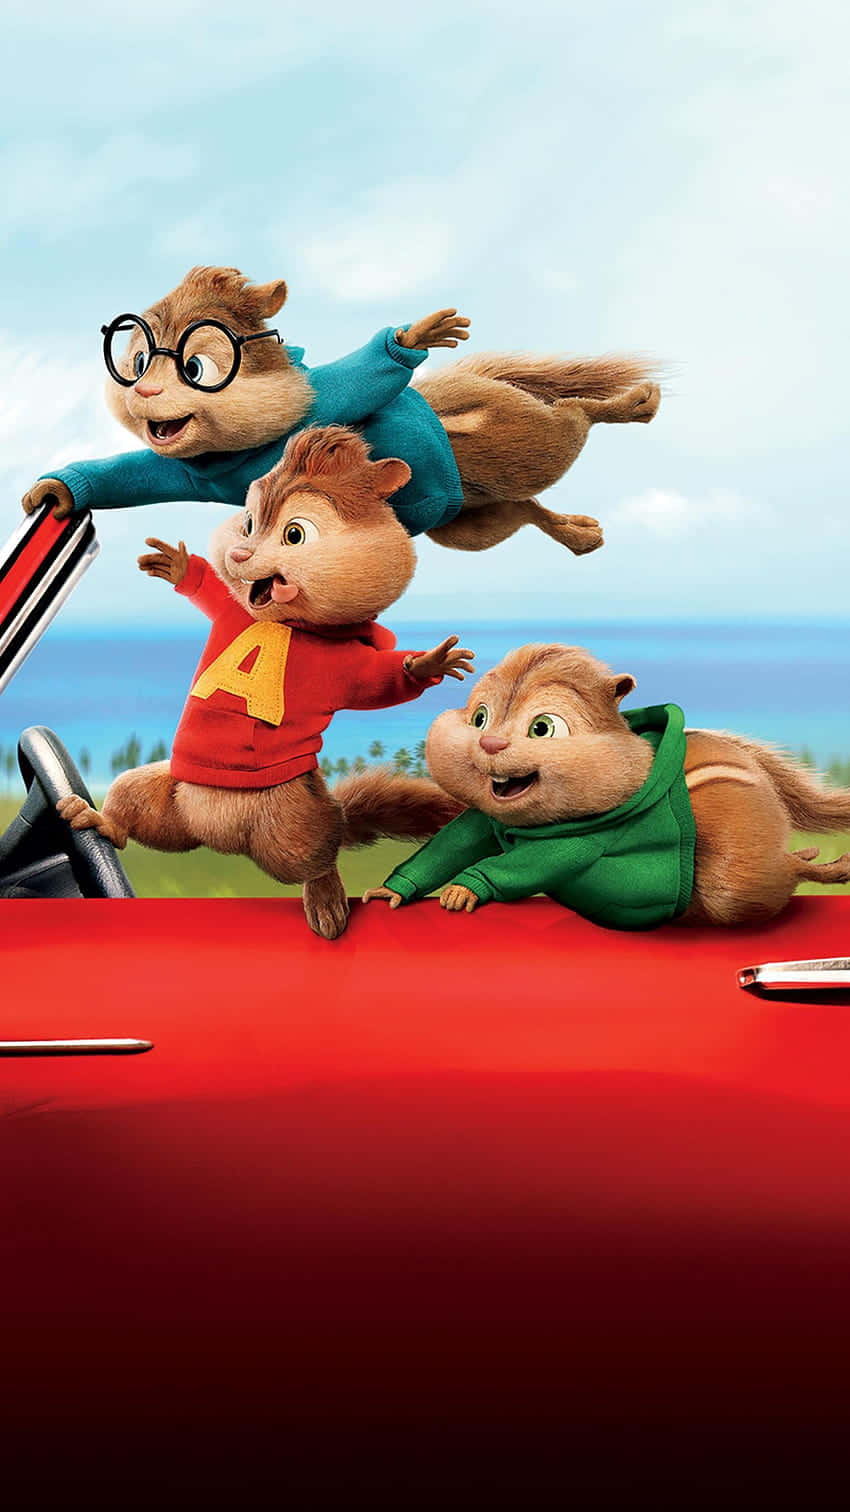 Get ready to party with Alvin and the Chipmunks!